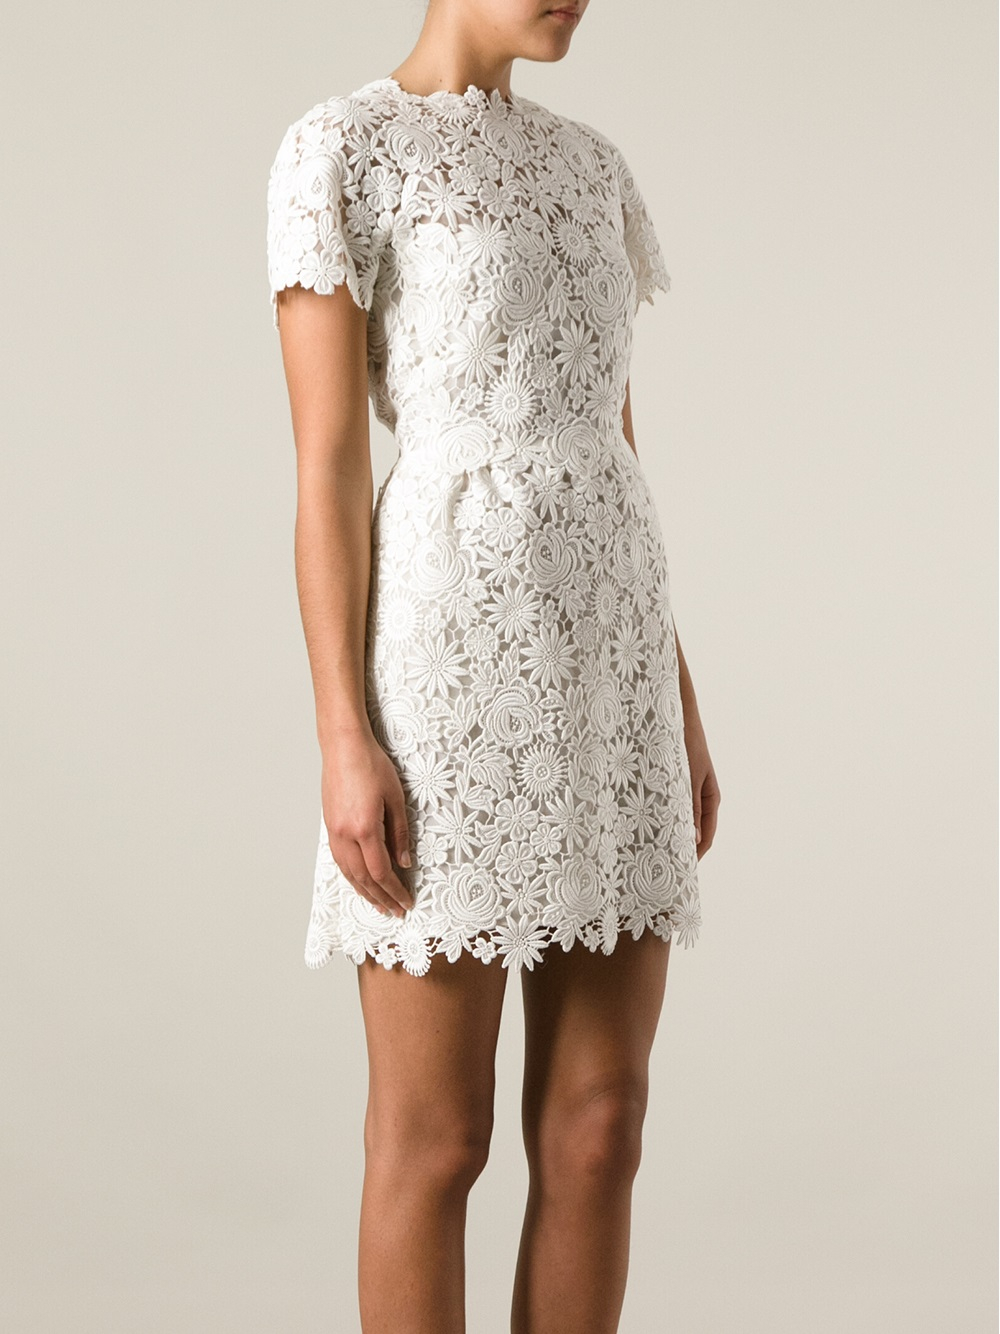 Red Valentino beige lace strappy dress with bow - BOPF | Business of  Preloved Fashion